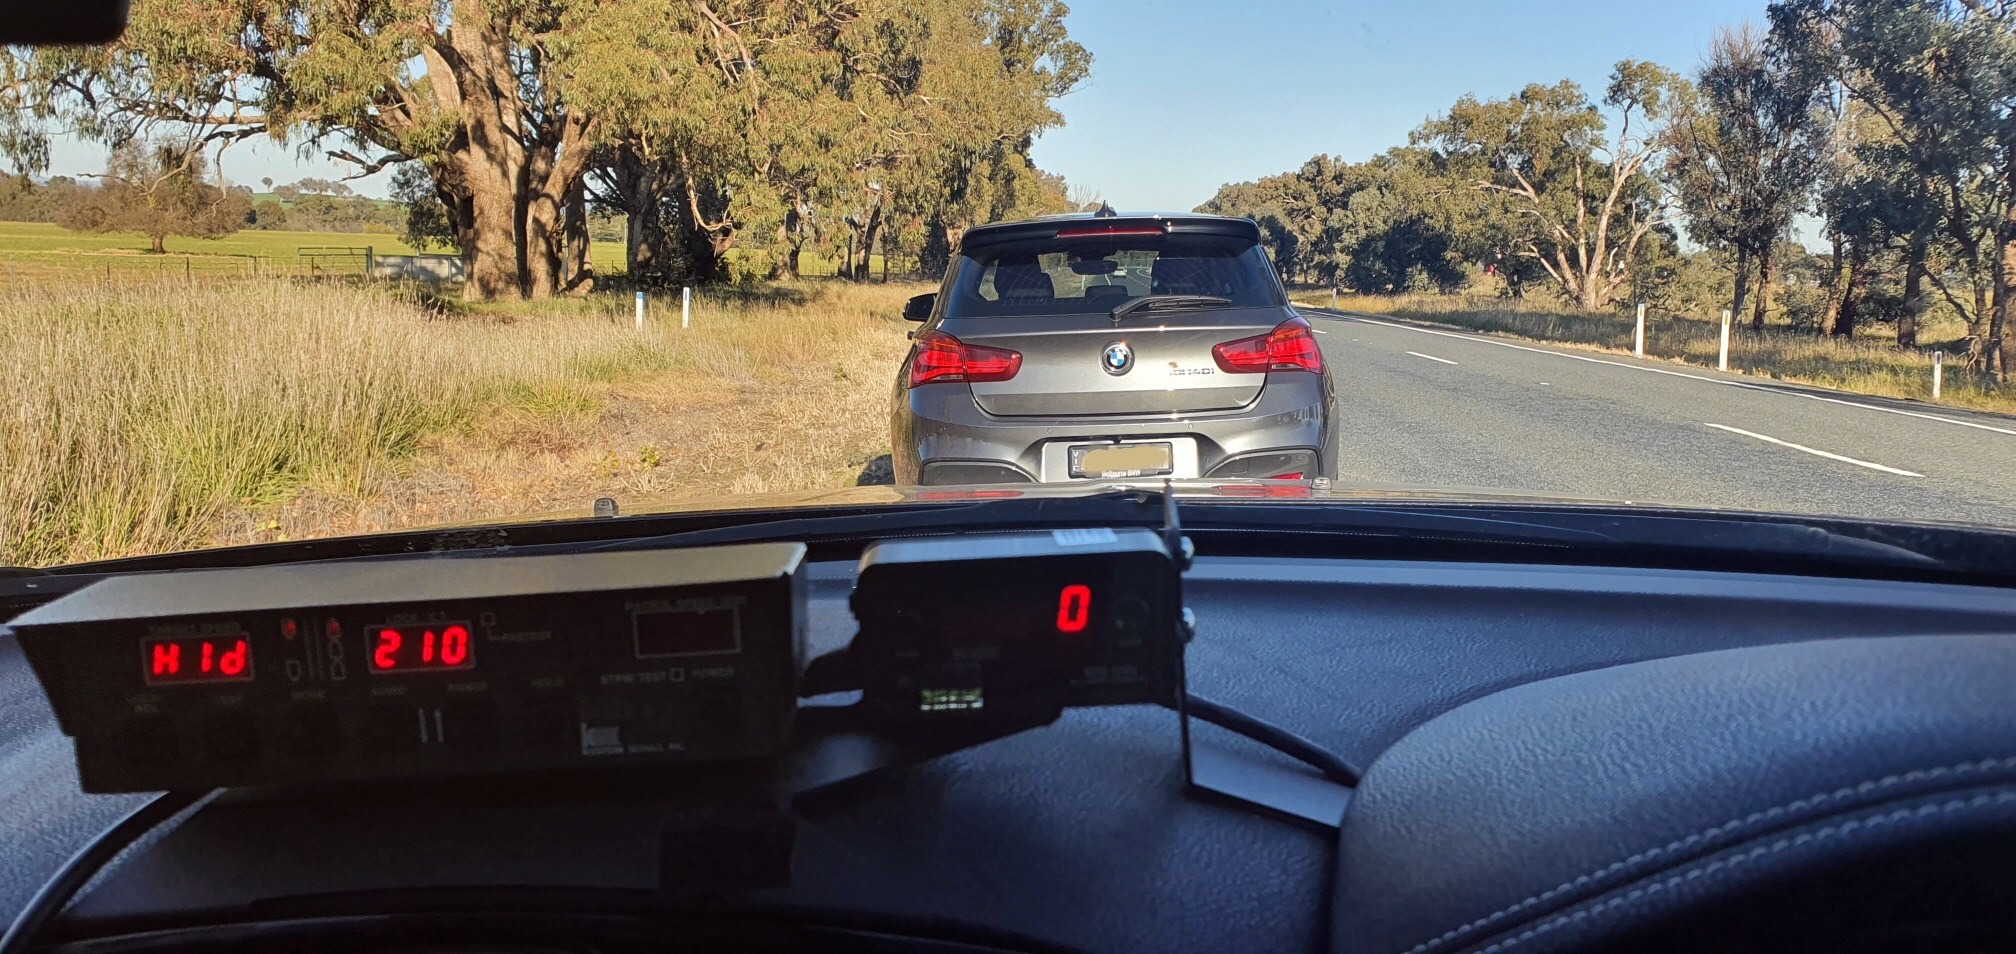 Driver detected travelling 100km/h over speed limit near Holbrook